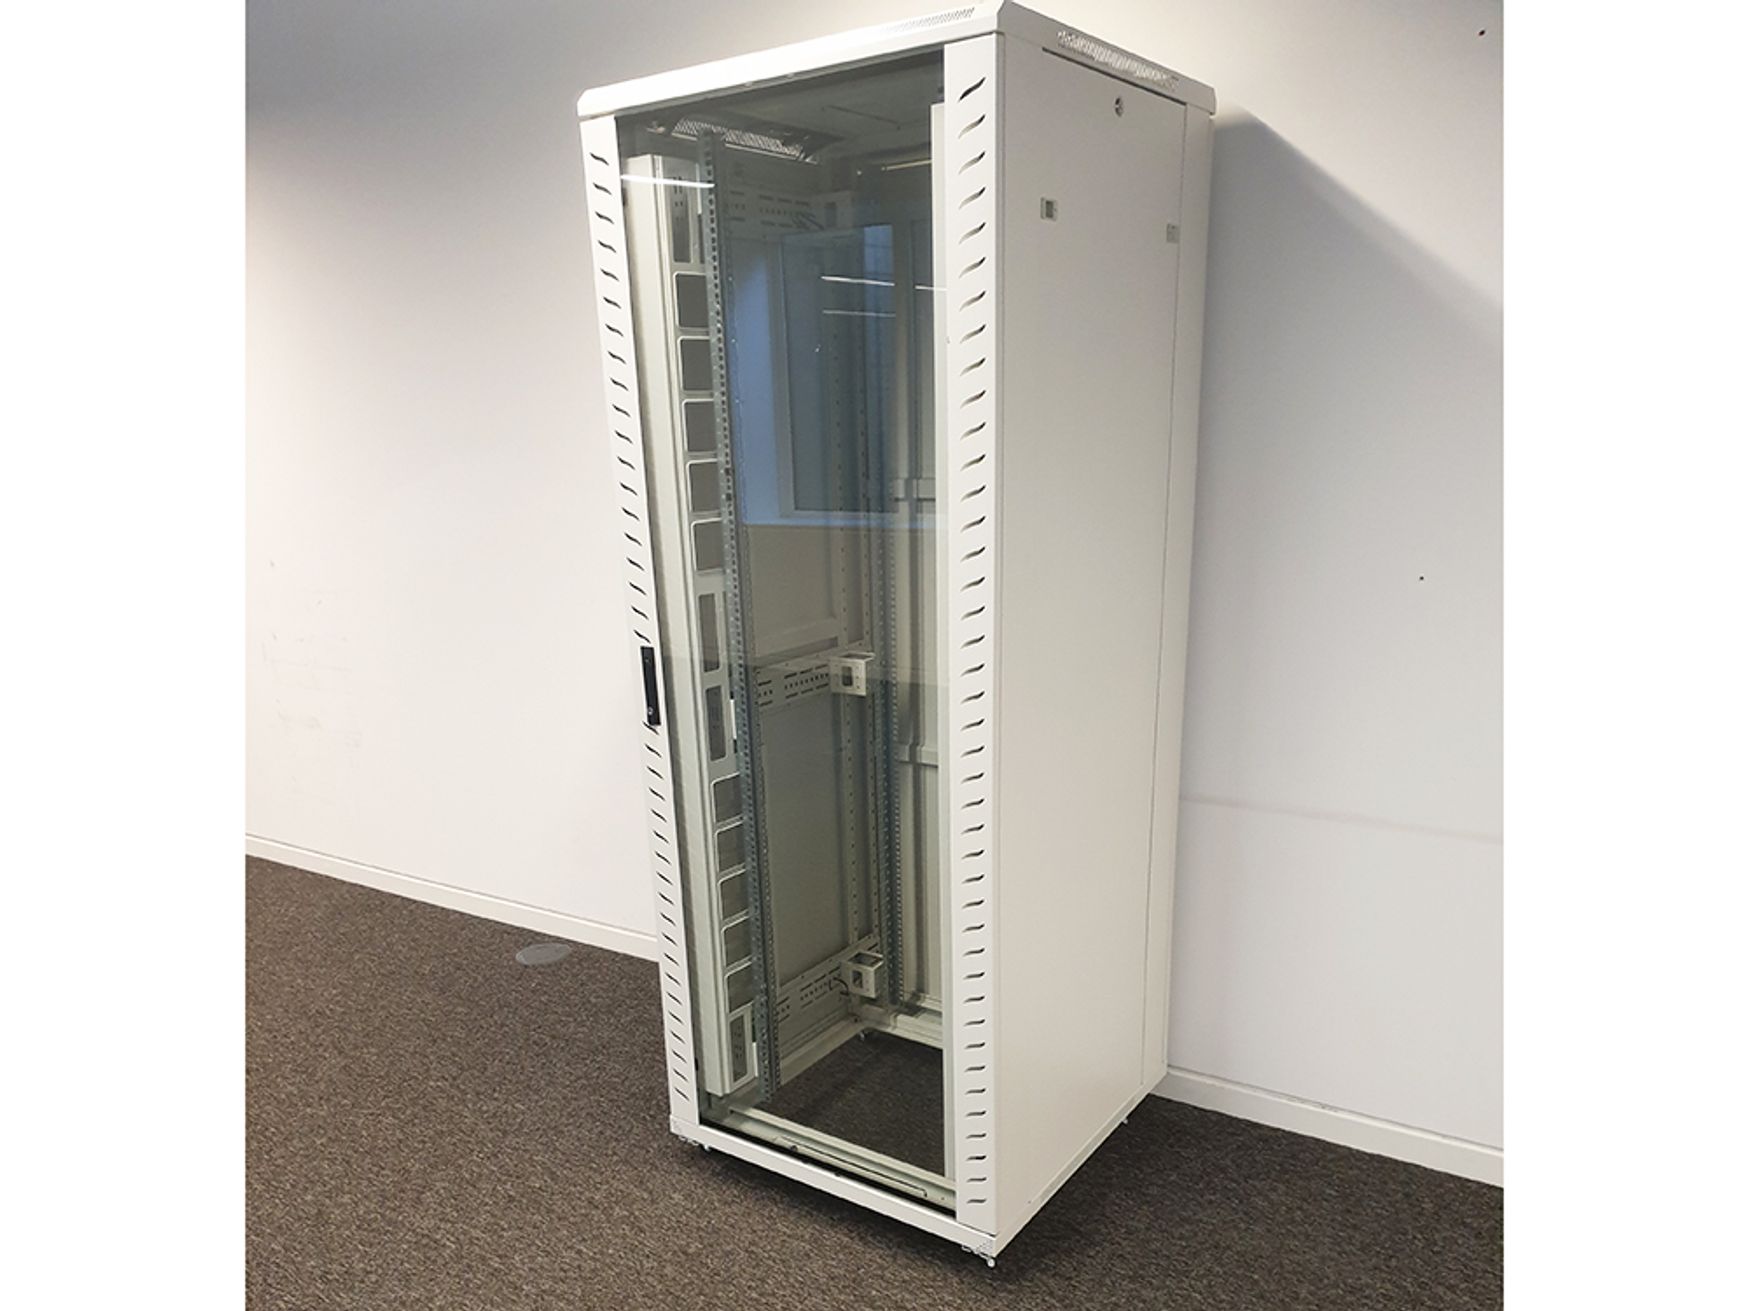 Used White Server Cabinet With Glass Door And Removable Panels